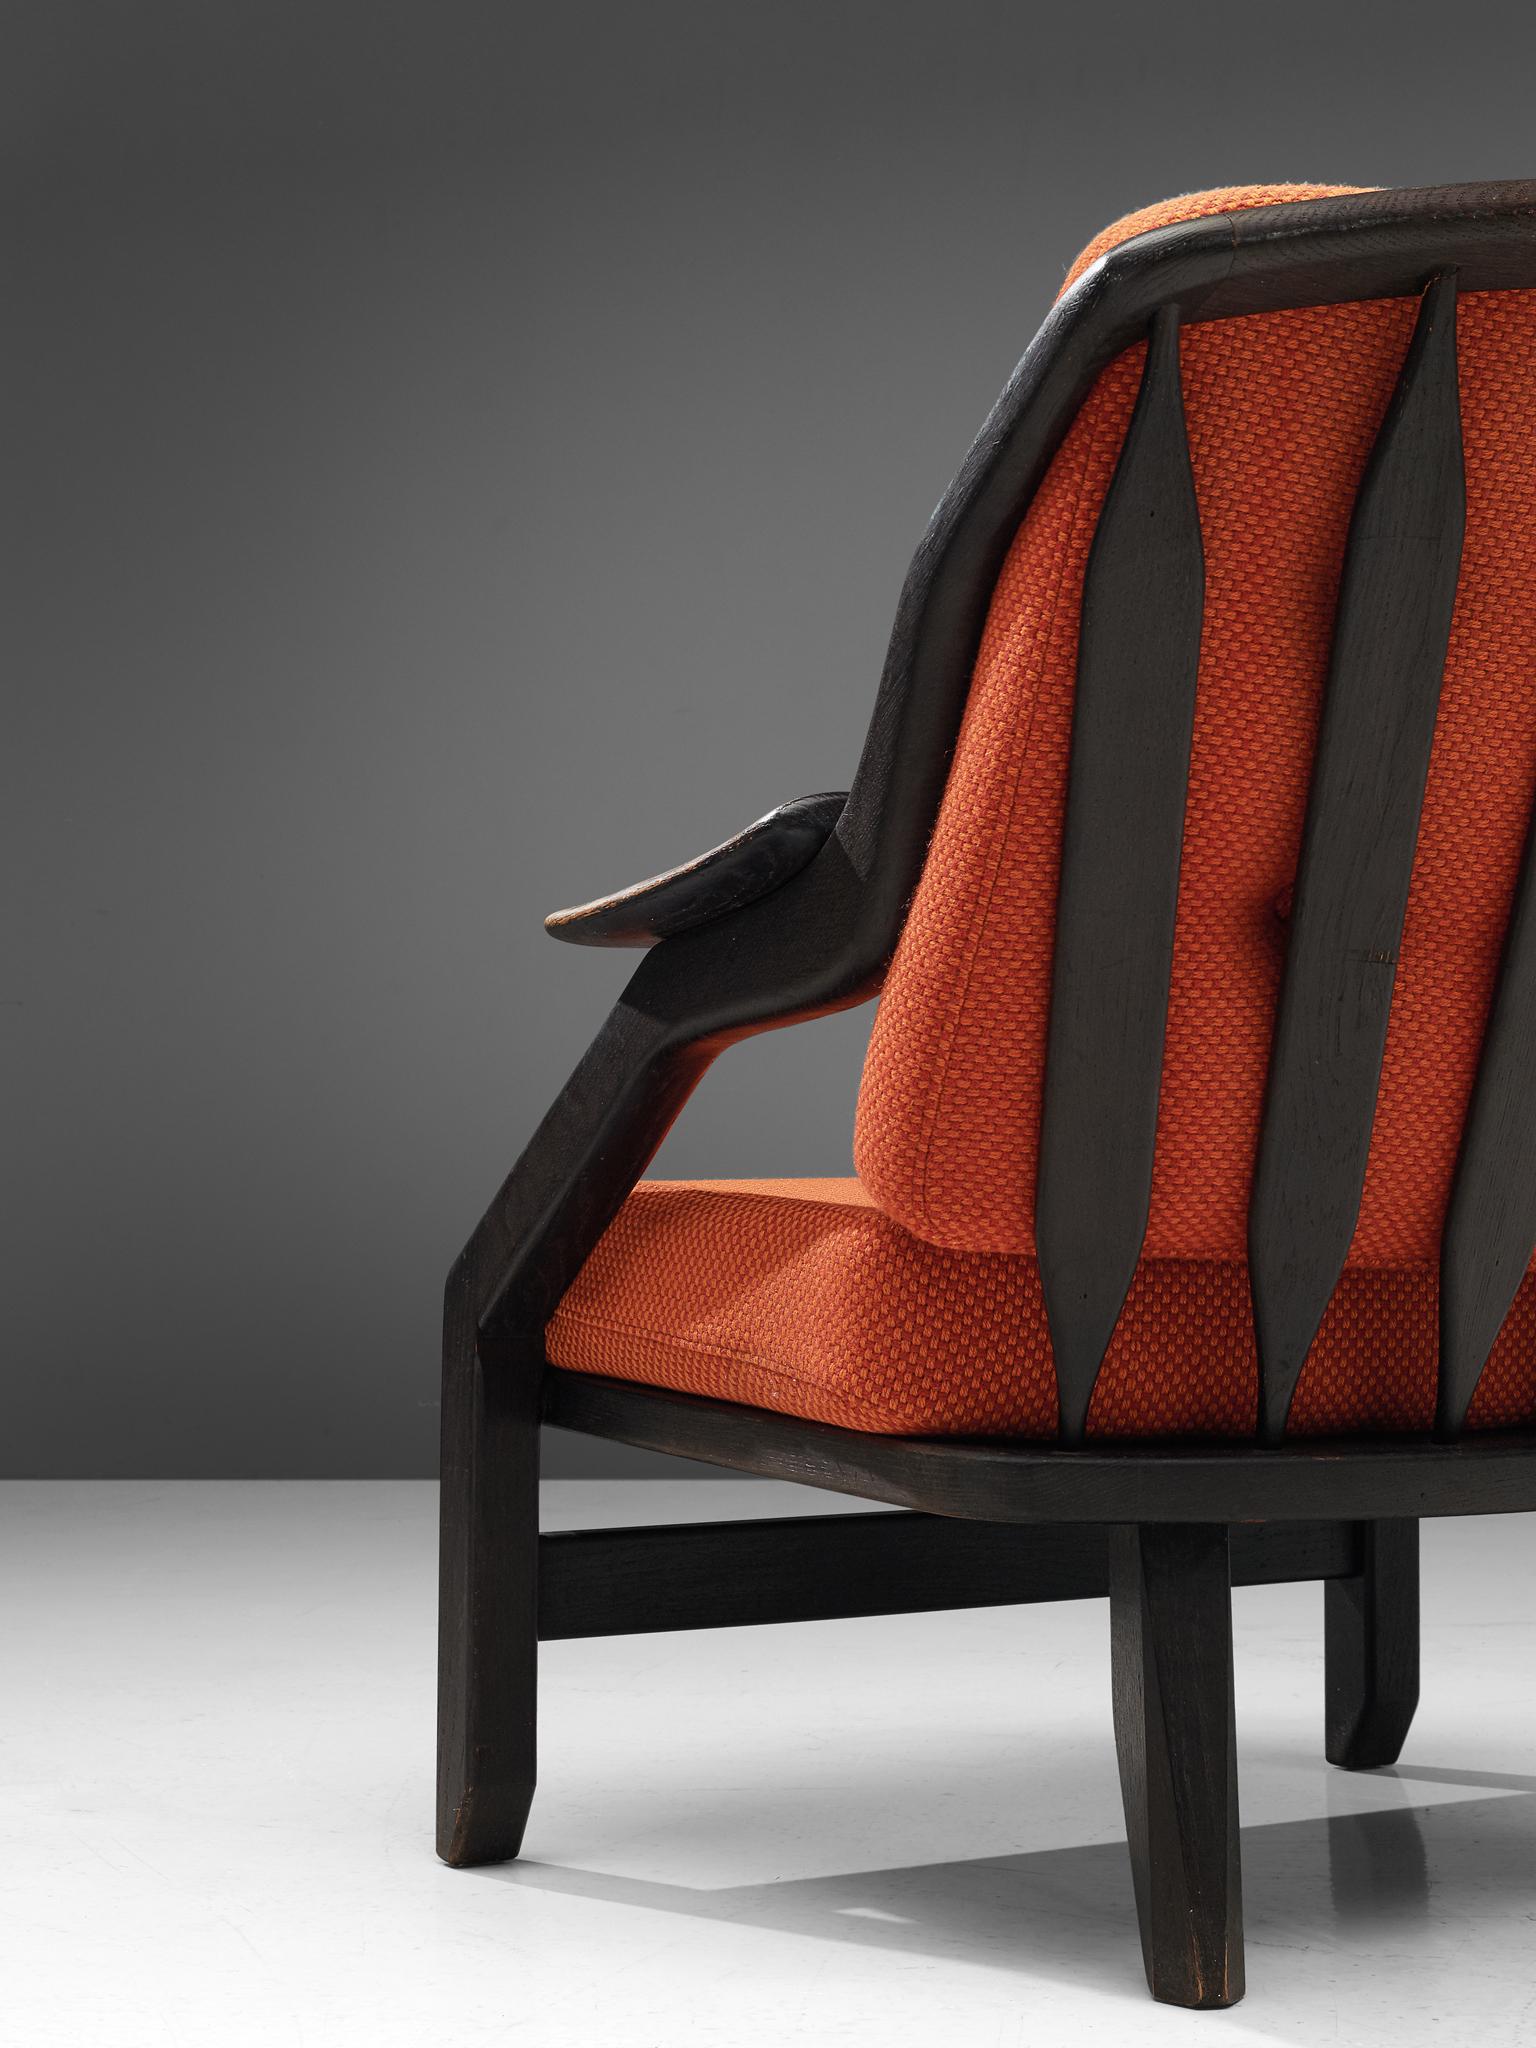 Mid-20th Century Pair of Lounge Chairs with Orange Upholstery by Guillerme & Chambron